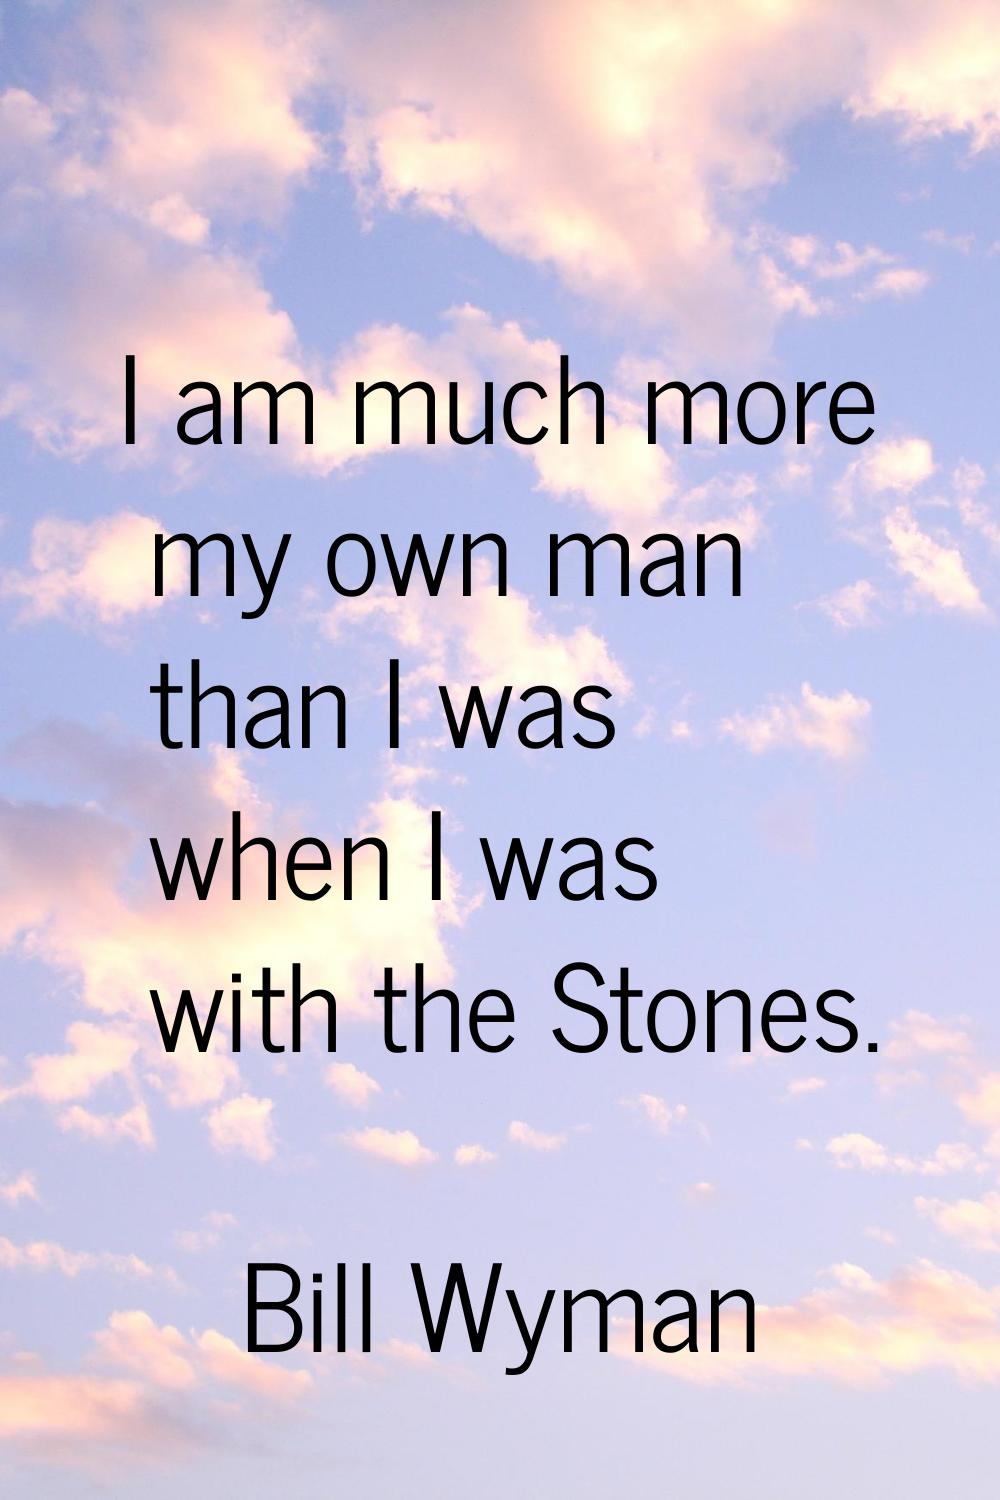 I am much more my own man than I was when I was with the Stones.